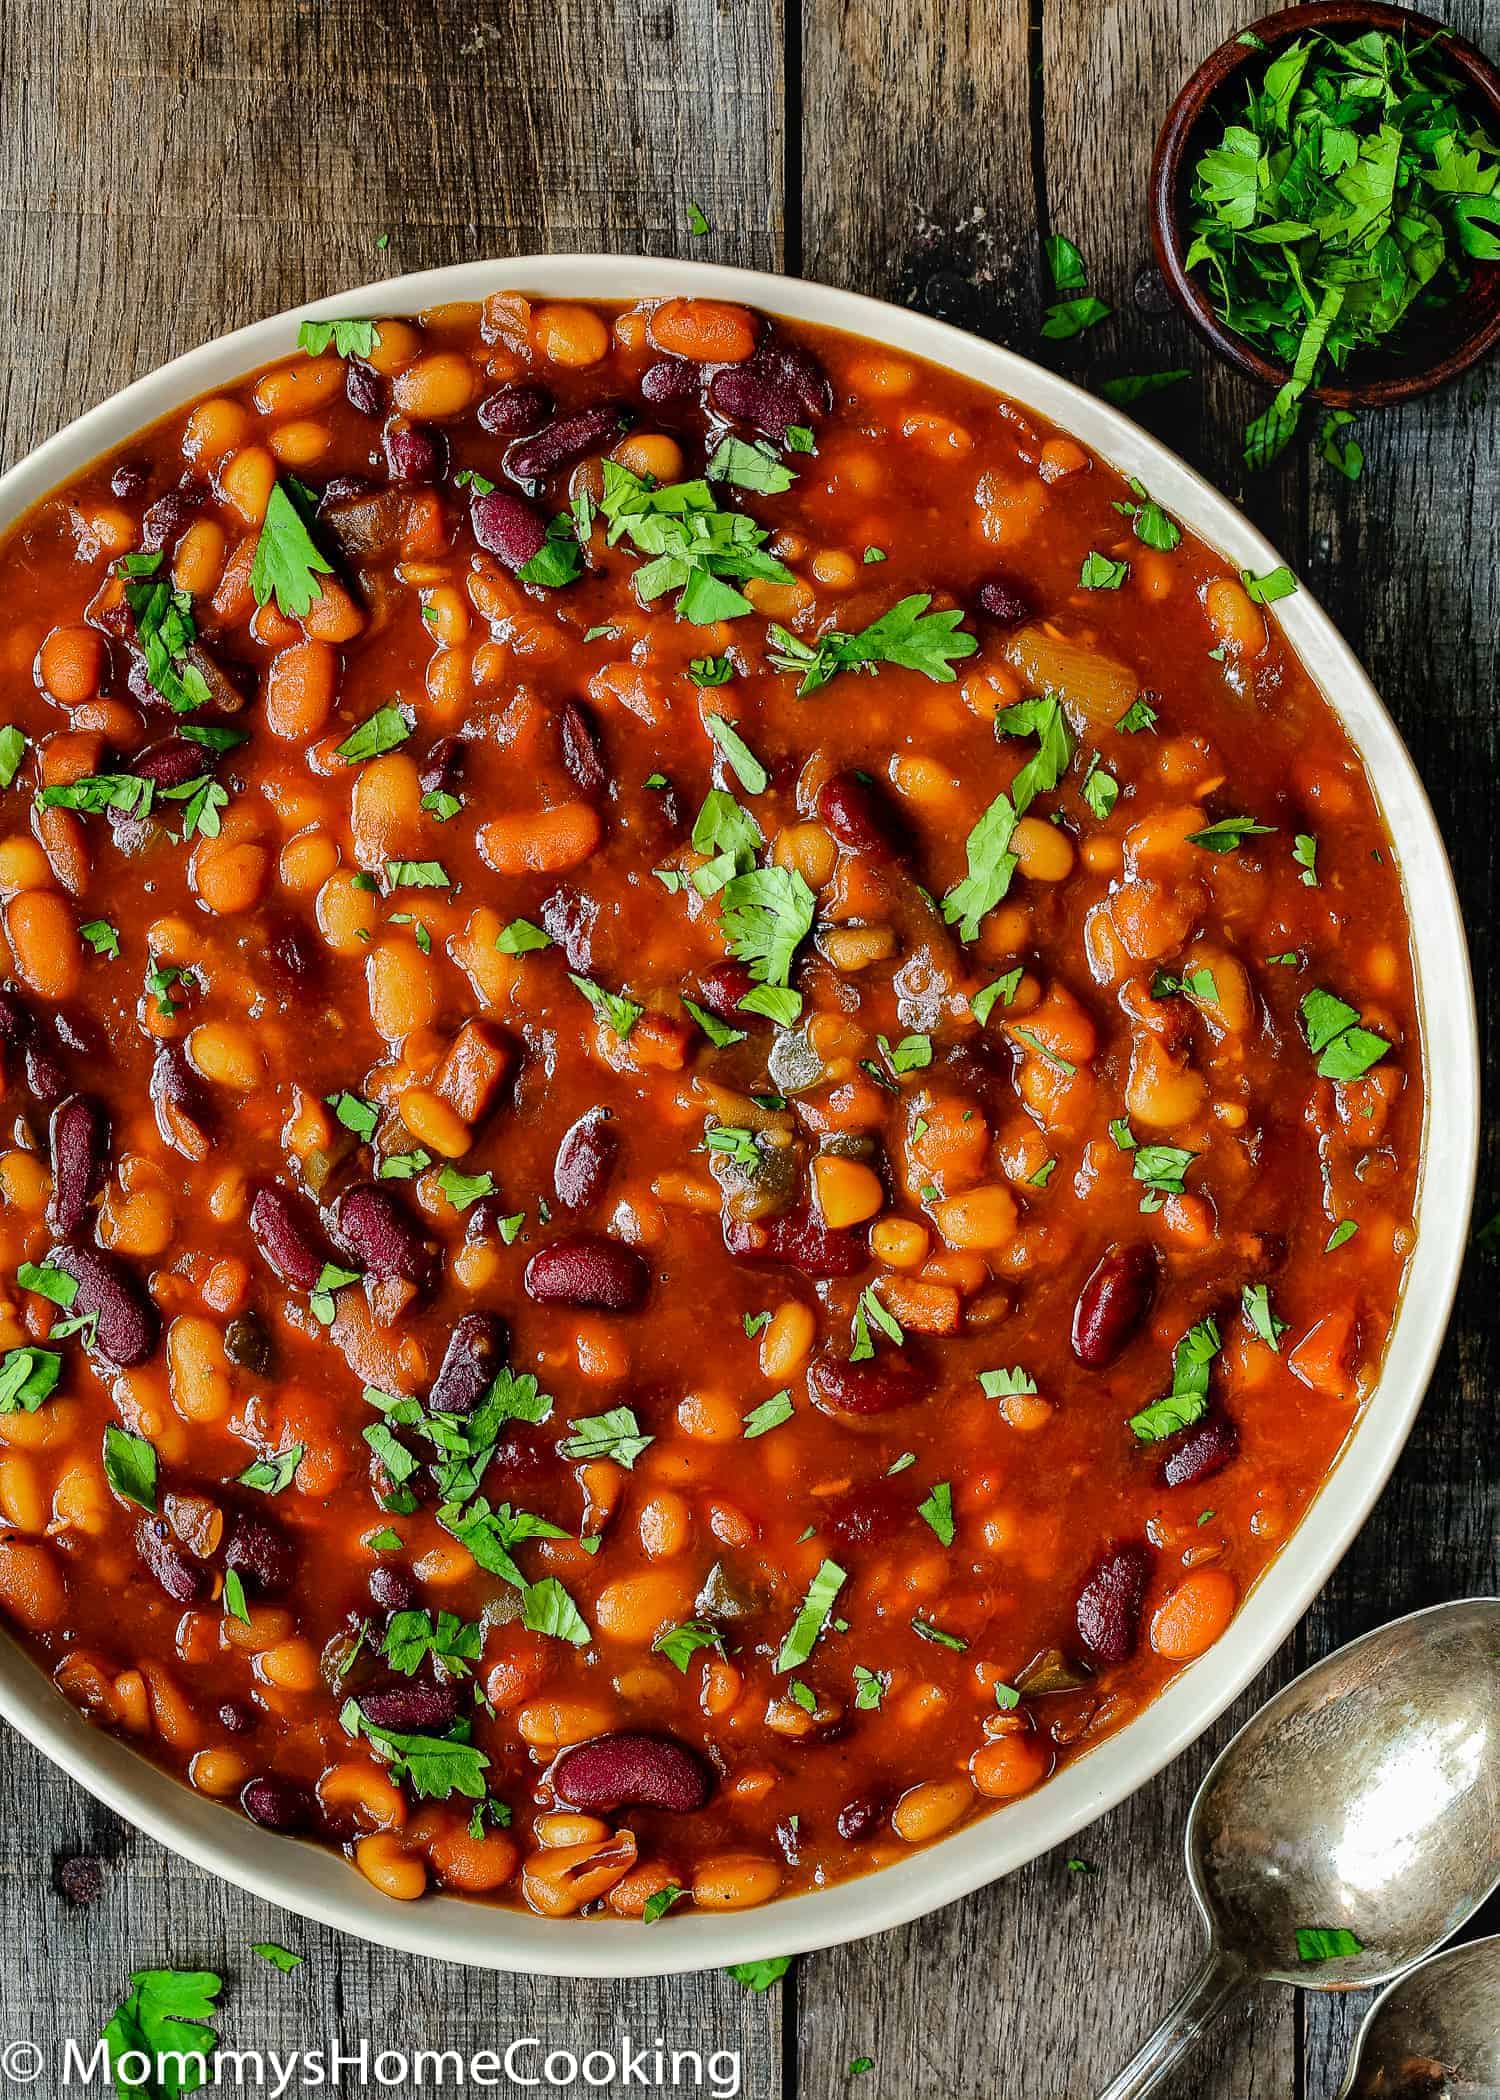 Easy Instant Pot Baked Beans Mommy's Home Cooking